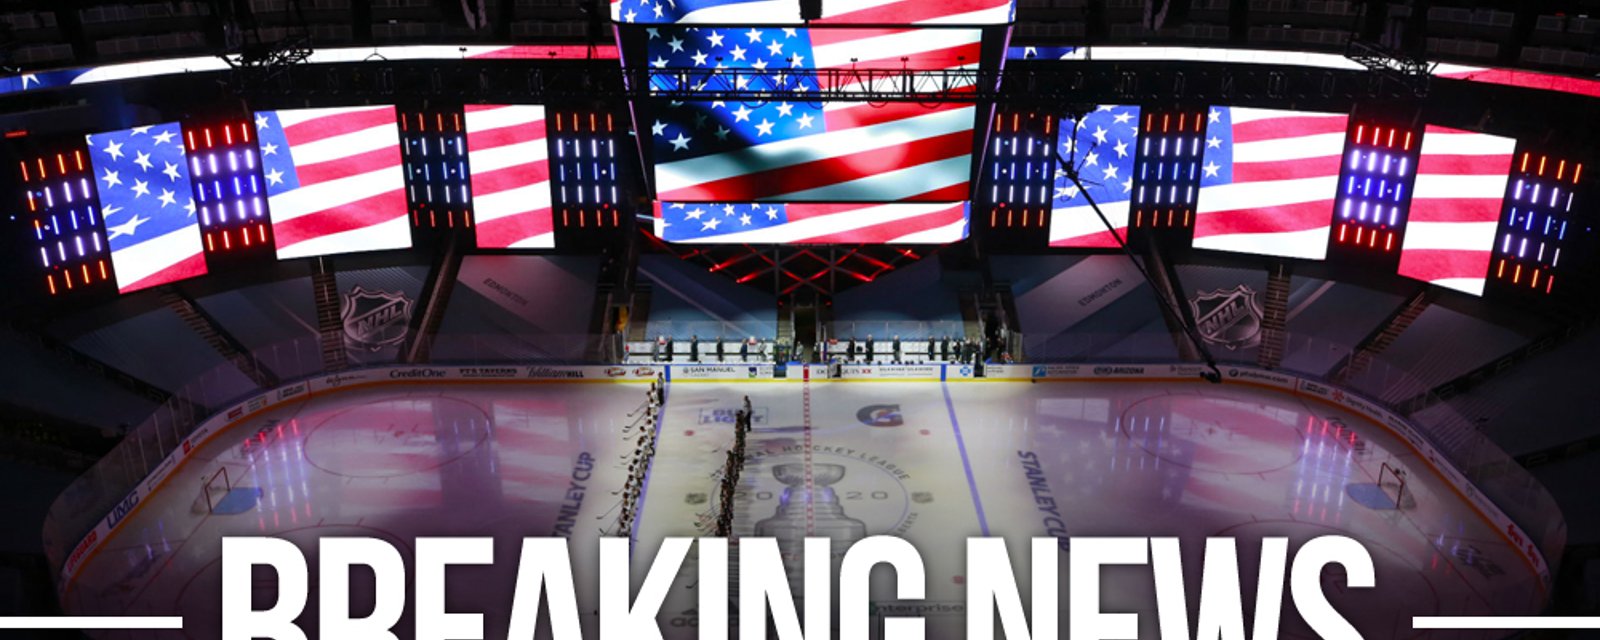 Report: NHL making plans to move Canadian teams to the U.S. for 2021 season